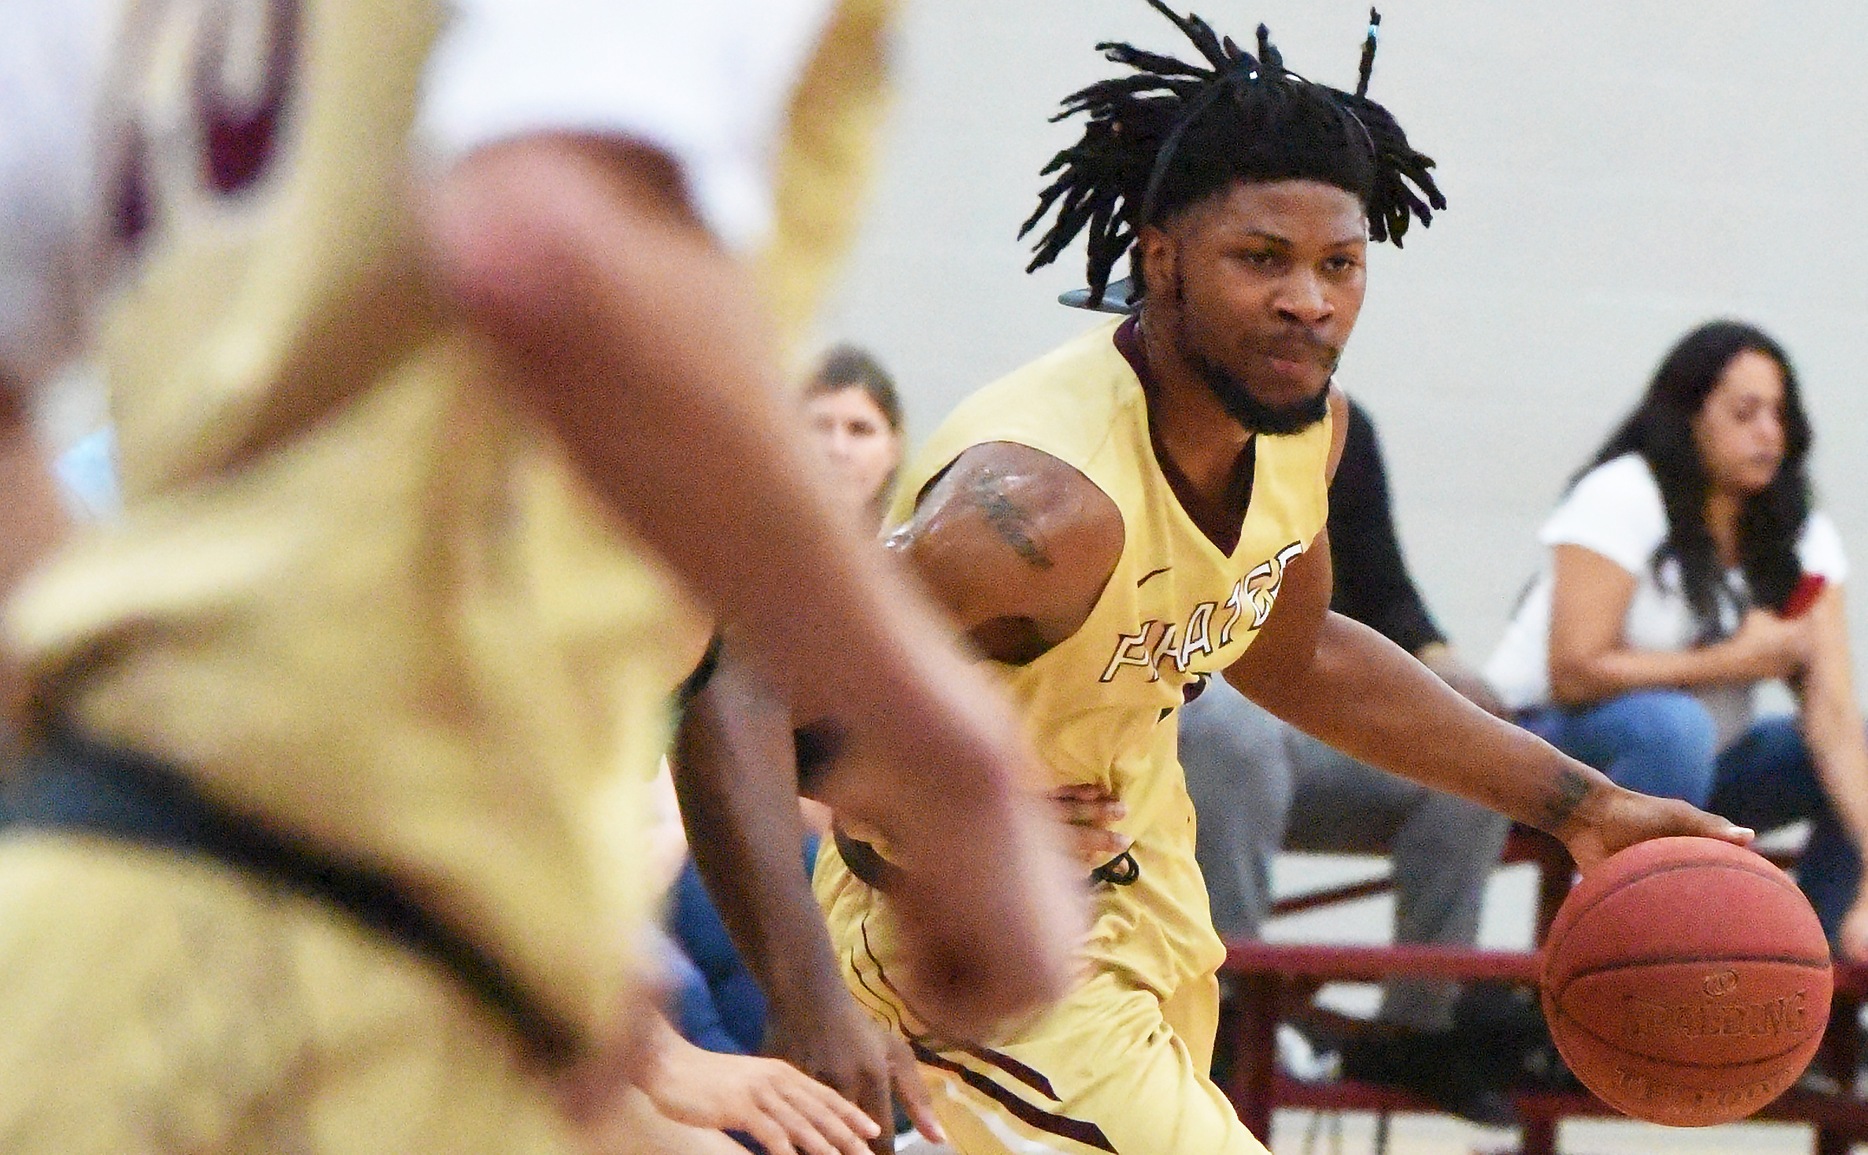 Kenyatis Turner record a double-double Saturday against Tyler Junior College with 18 points and 11 rebounds.